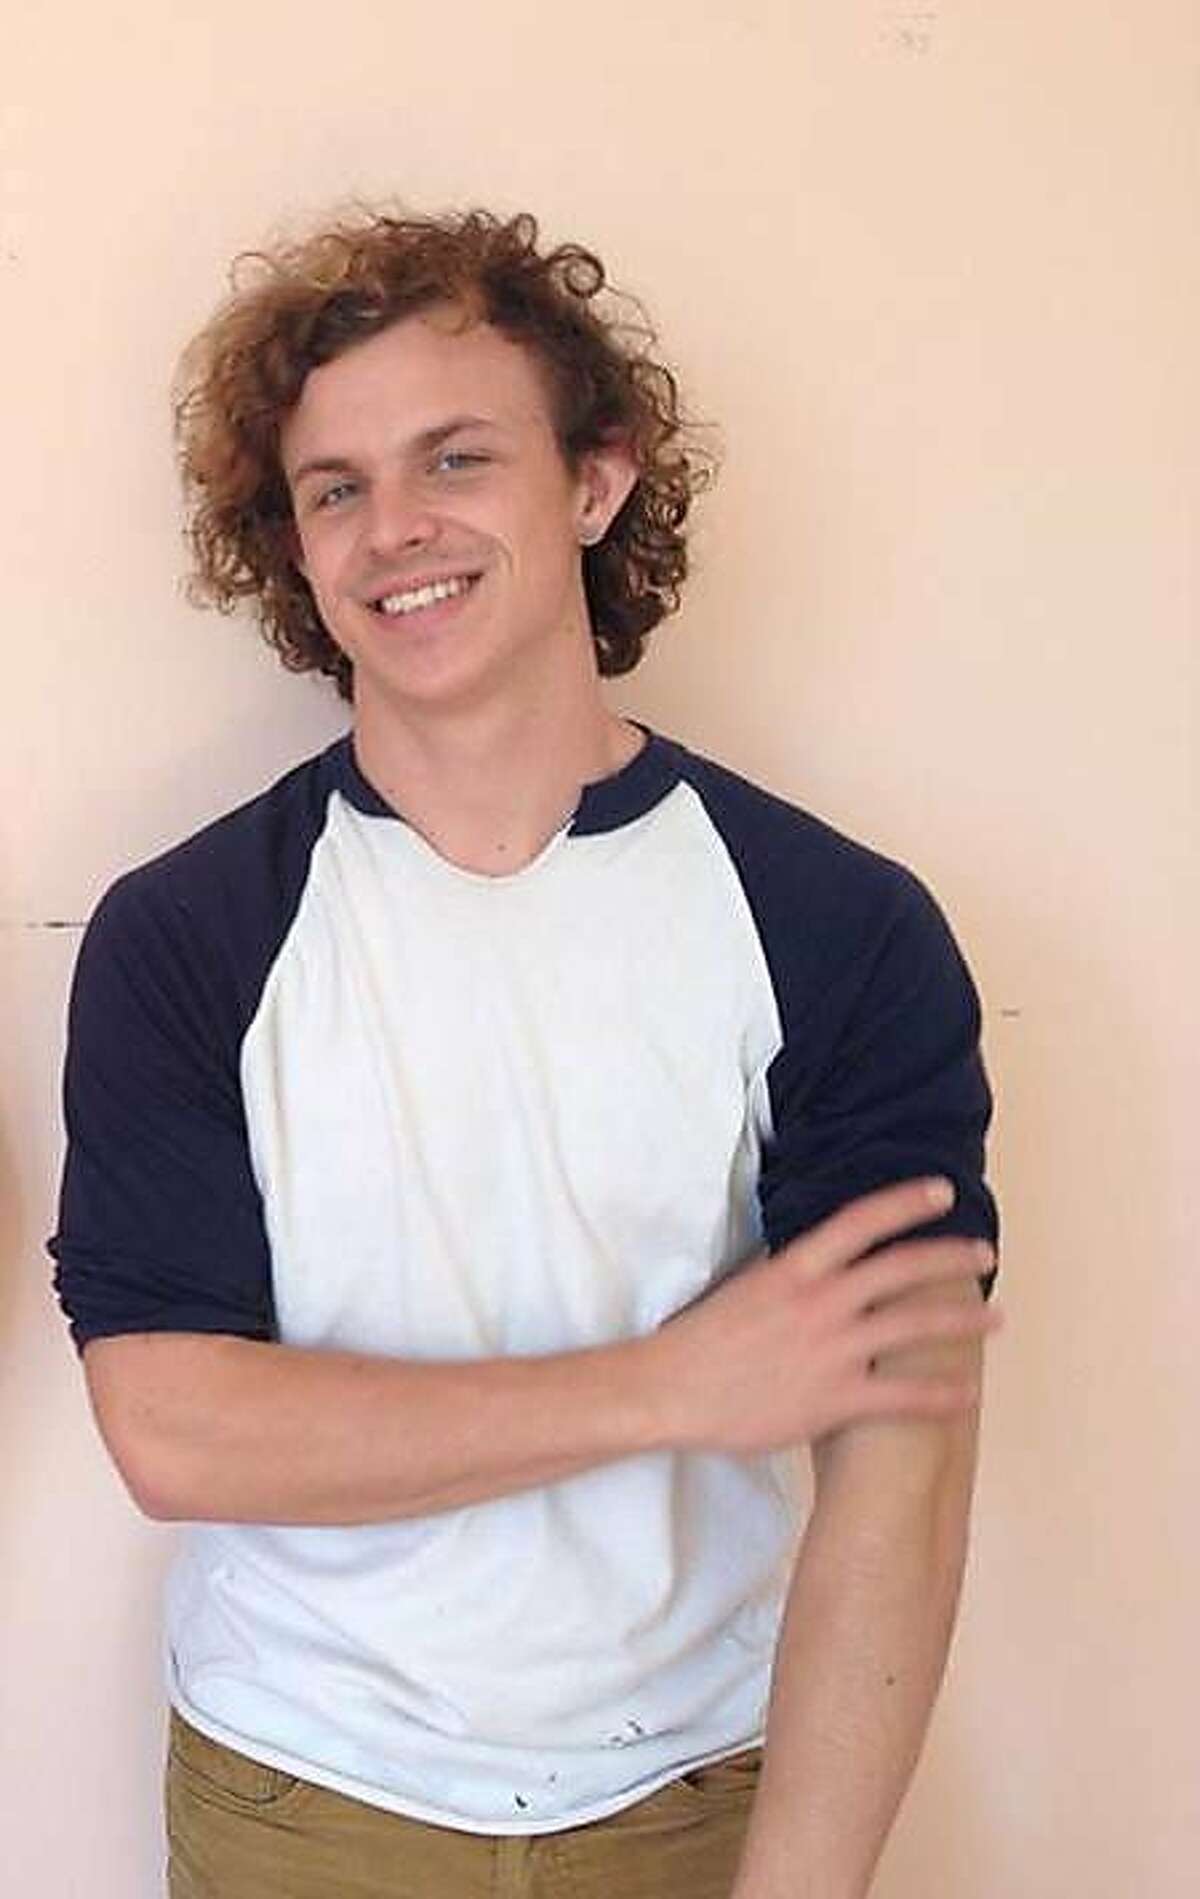 Griffin Madden was one of 36 people who died in an Oakland warehouse fire on Dec. 2, 2016. Photo: Courtesy Cal Performances